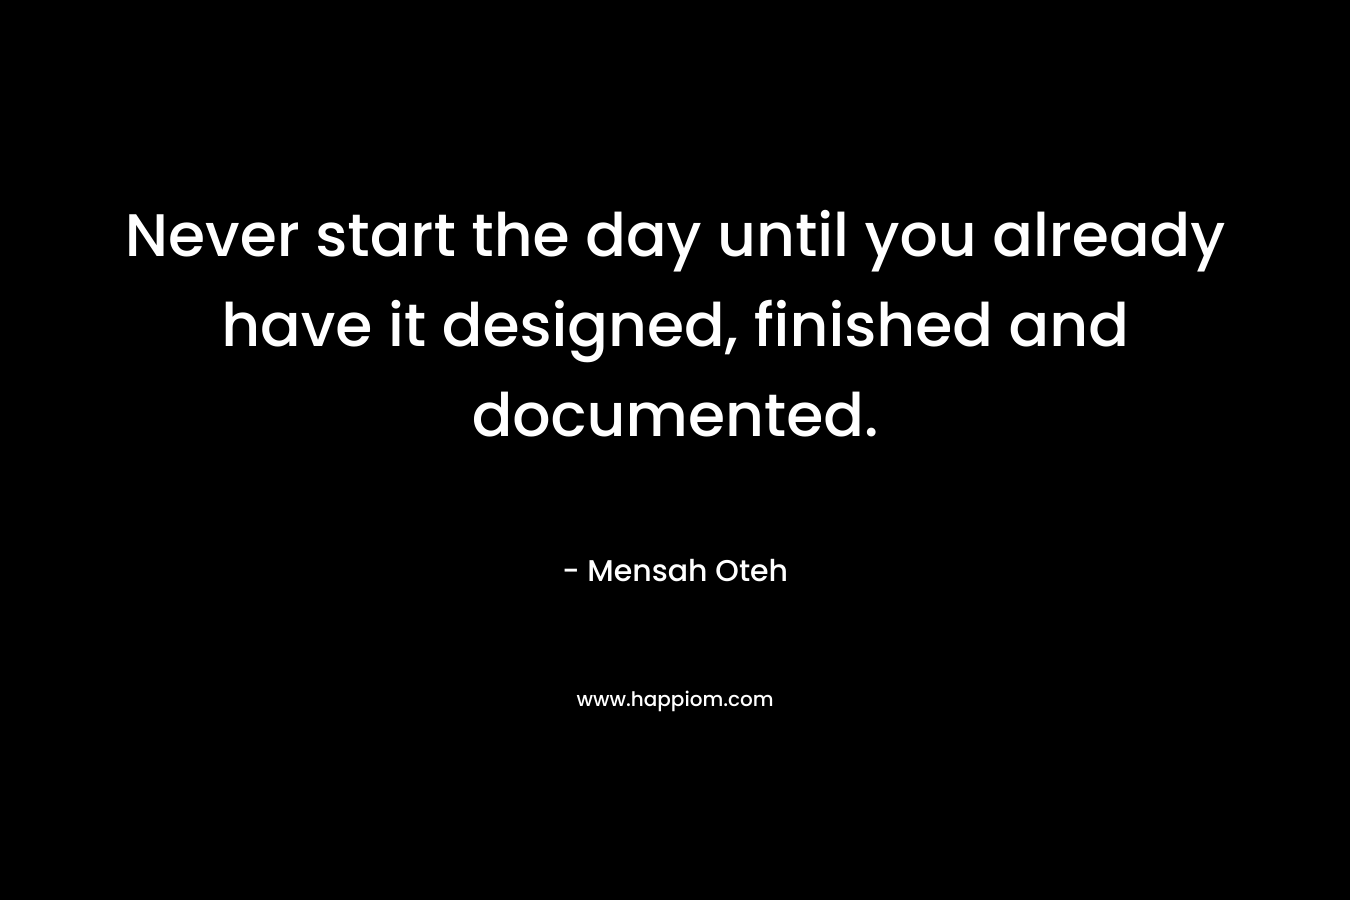 Never start the day until you already have it designed, finished and documented.